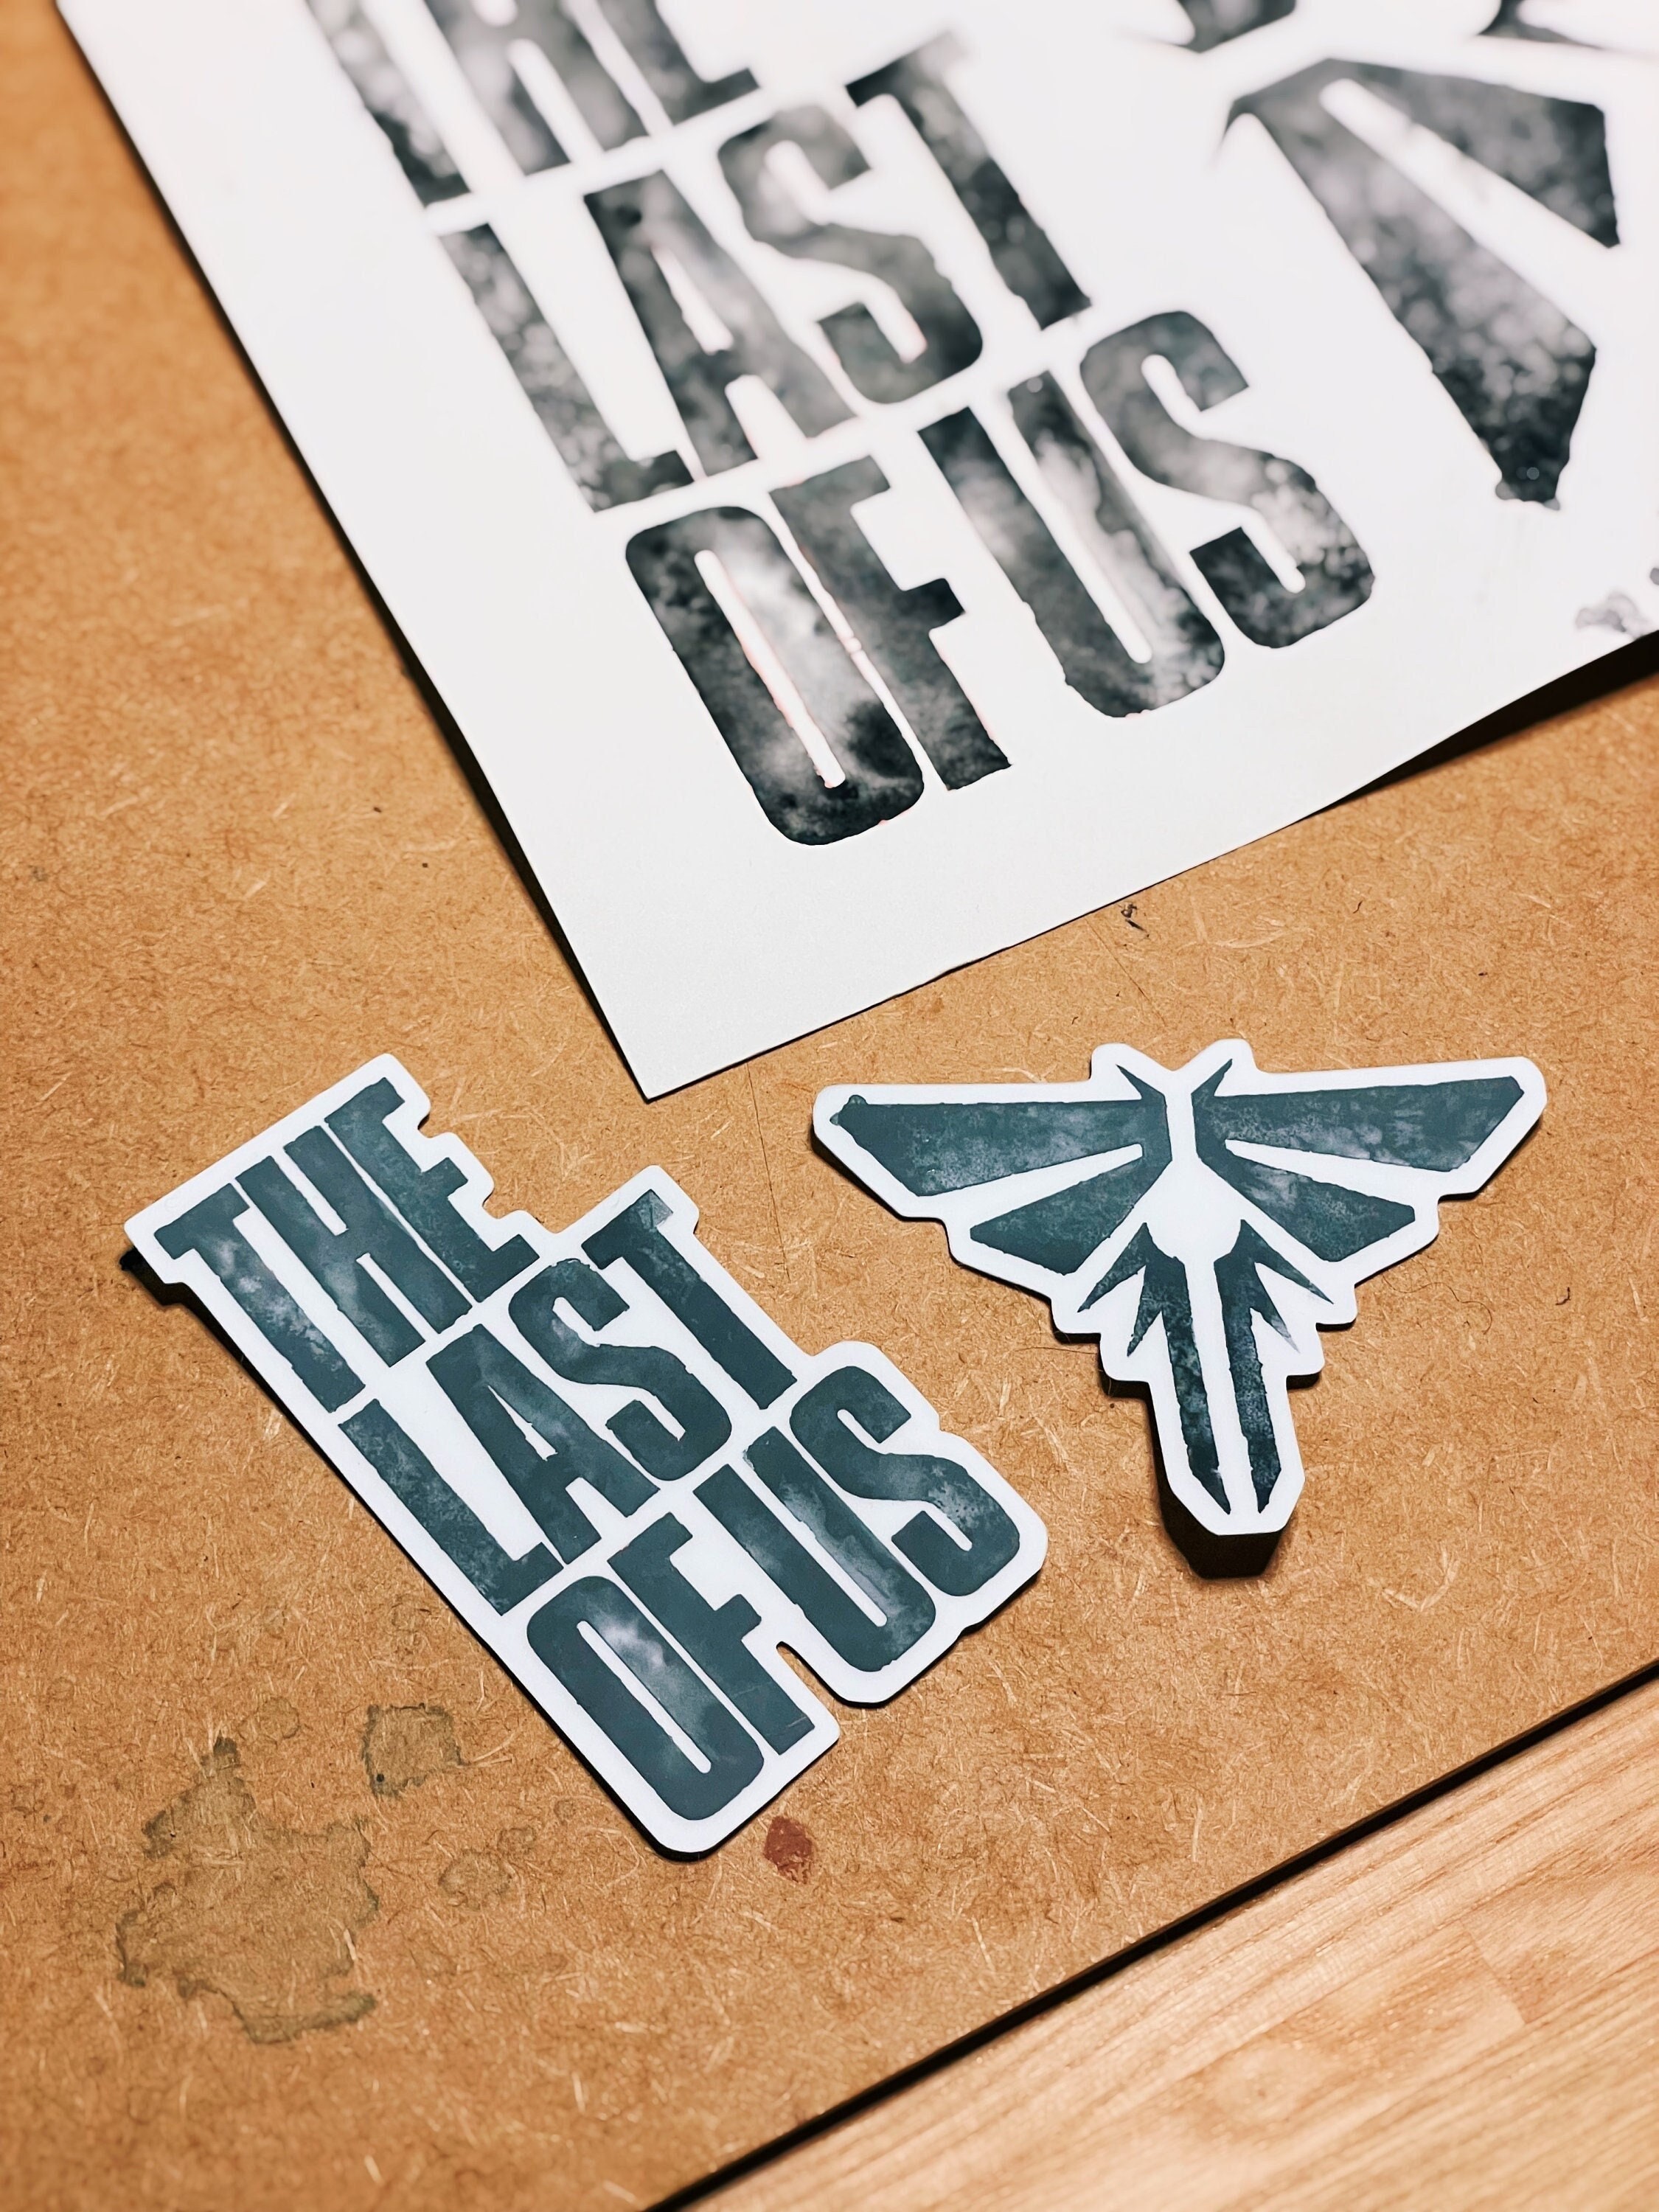 The 15 Best The Last of Us Gifts for Aficionados — The Last of Us